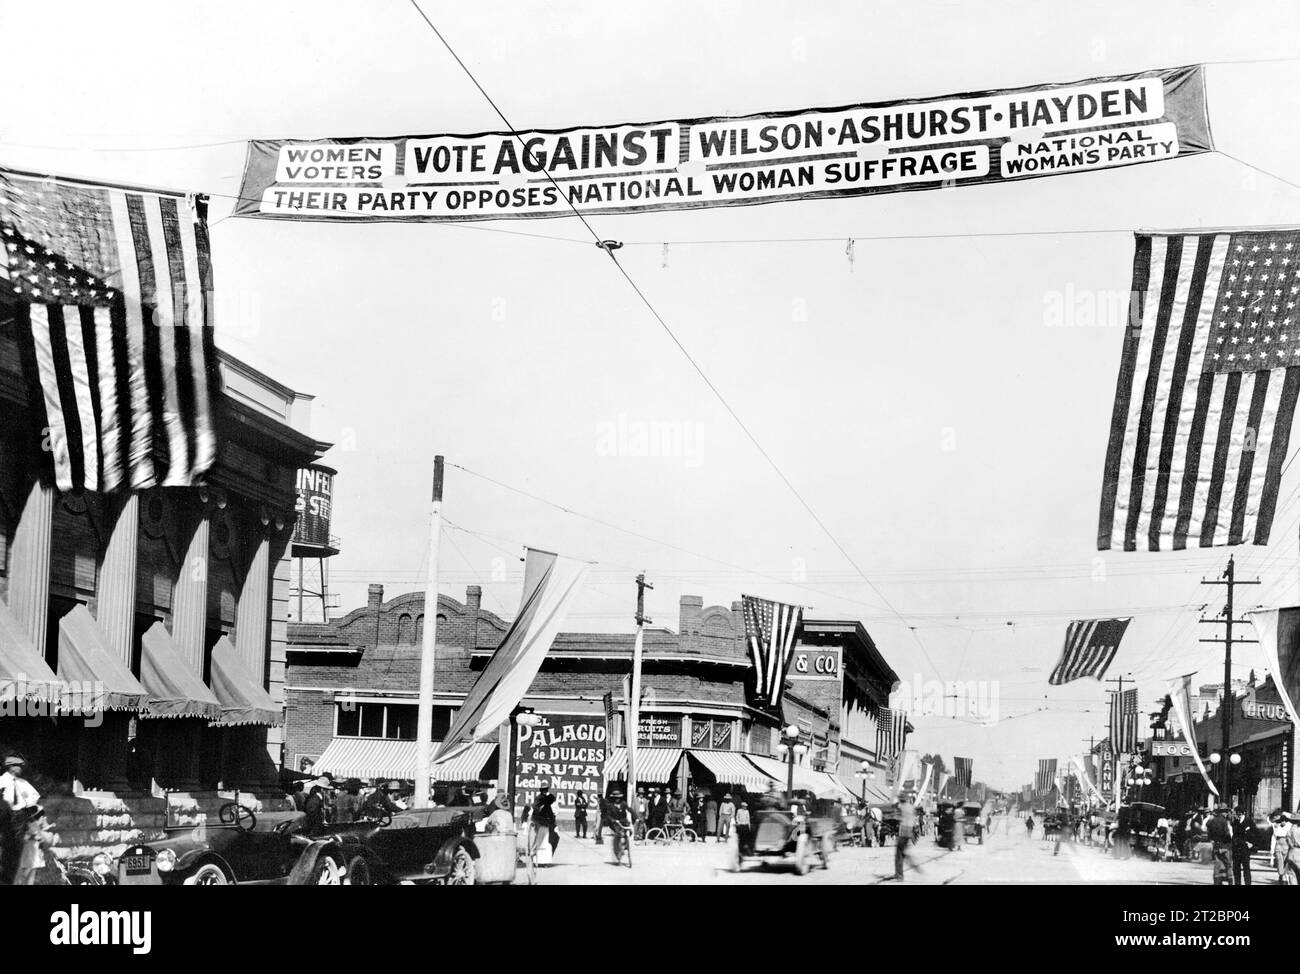 Controversial  National Woman's Party banner hanging across street, Tucson, Arizona, USA, National Woman's Party, November 1916 Stock Photo